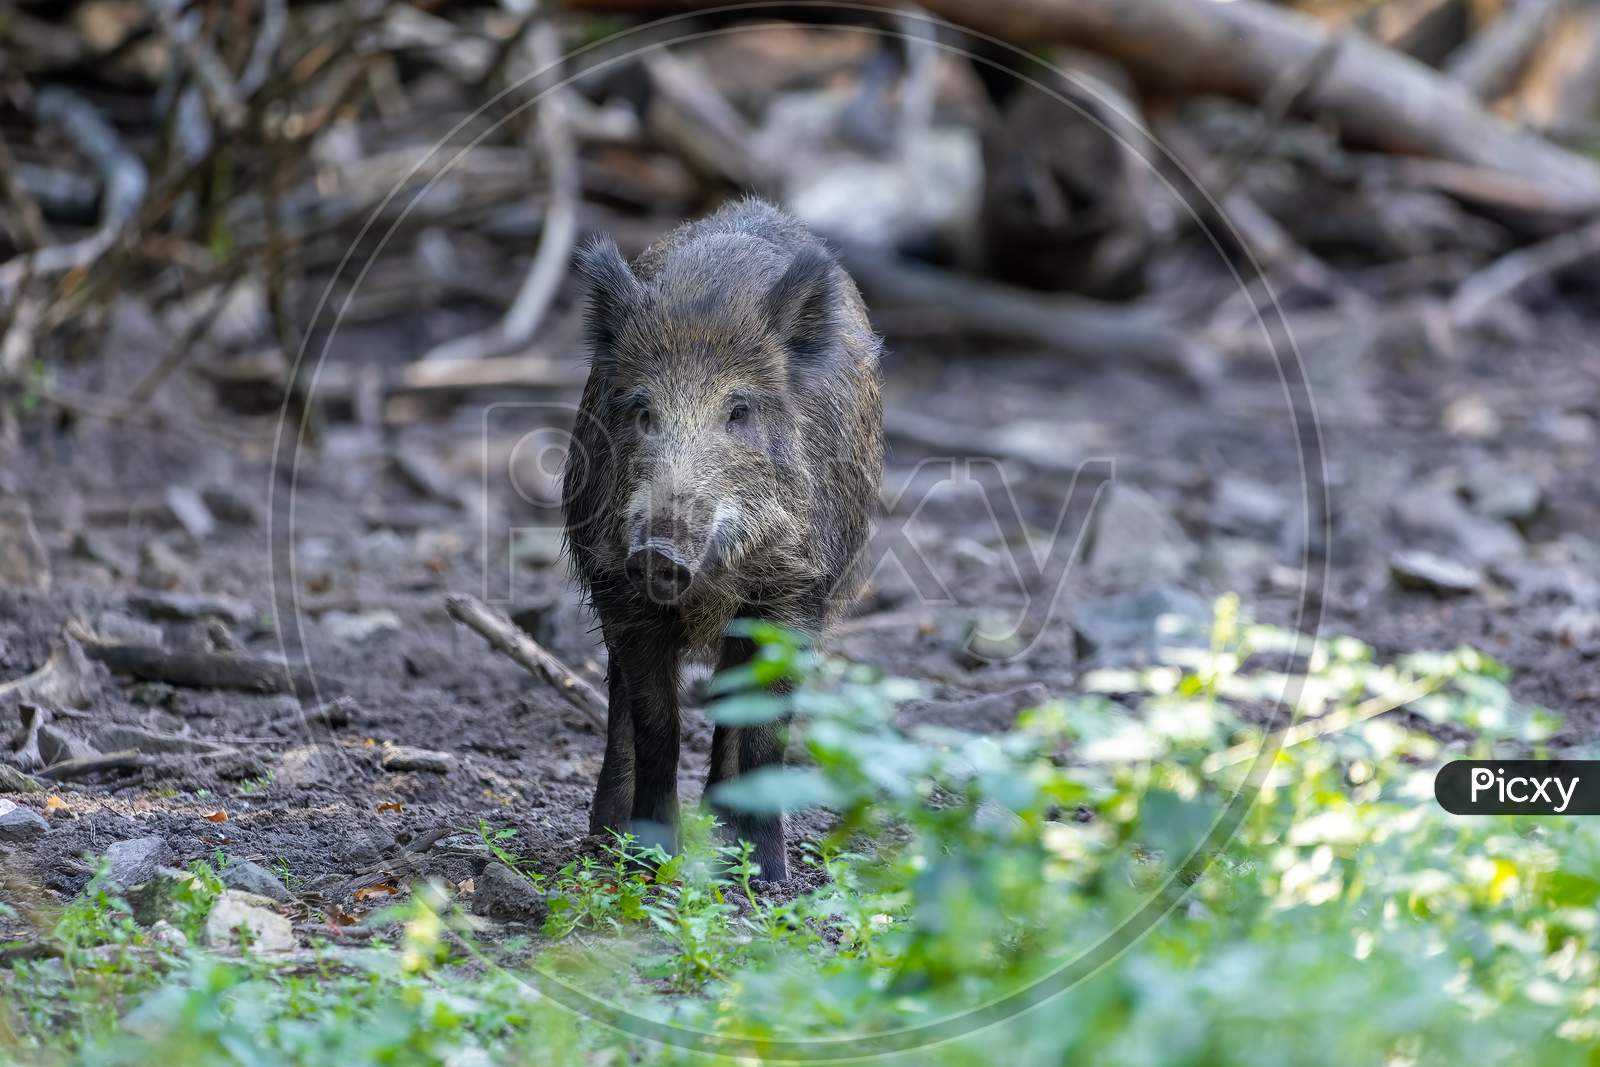 A wild boar in a forest in Hesse, Germany at a sunny day in summer.